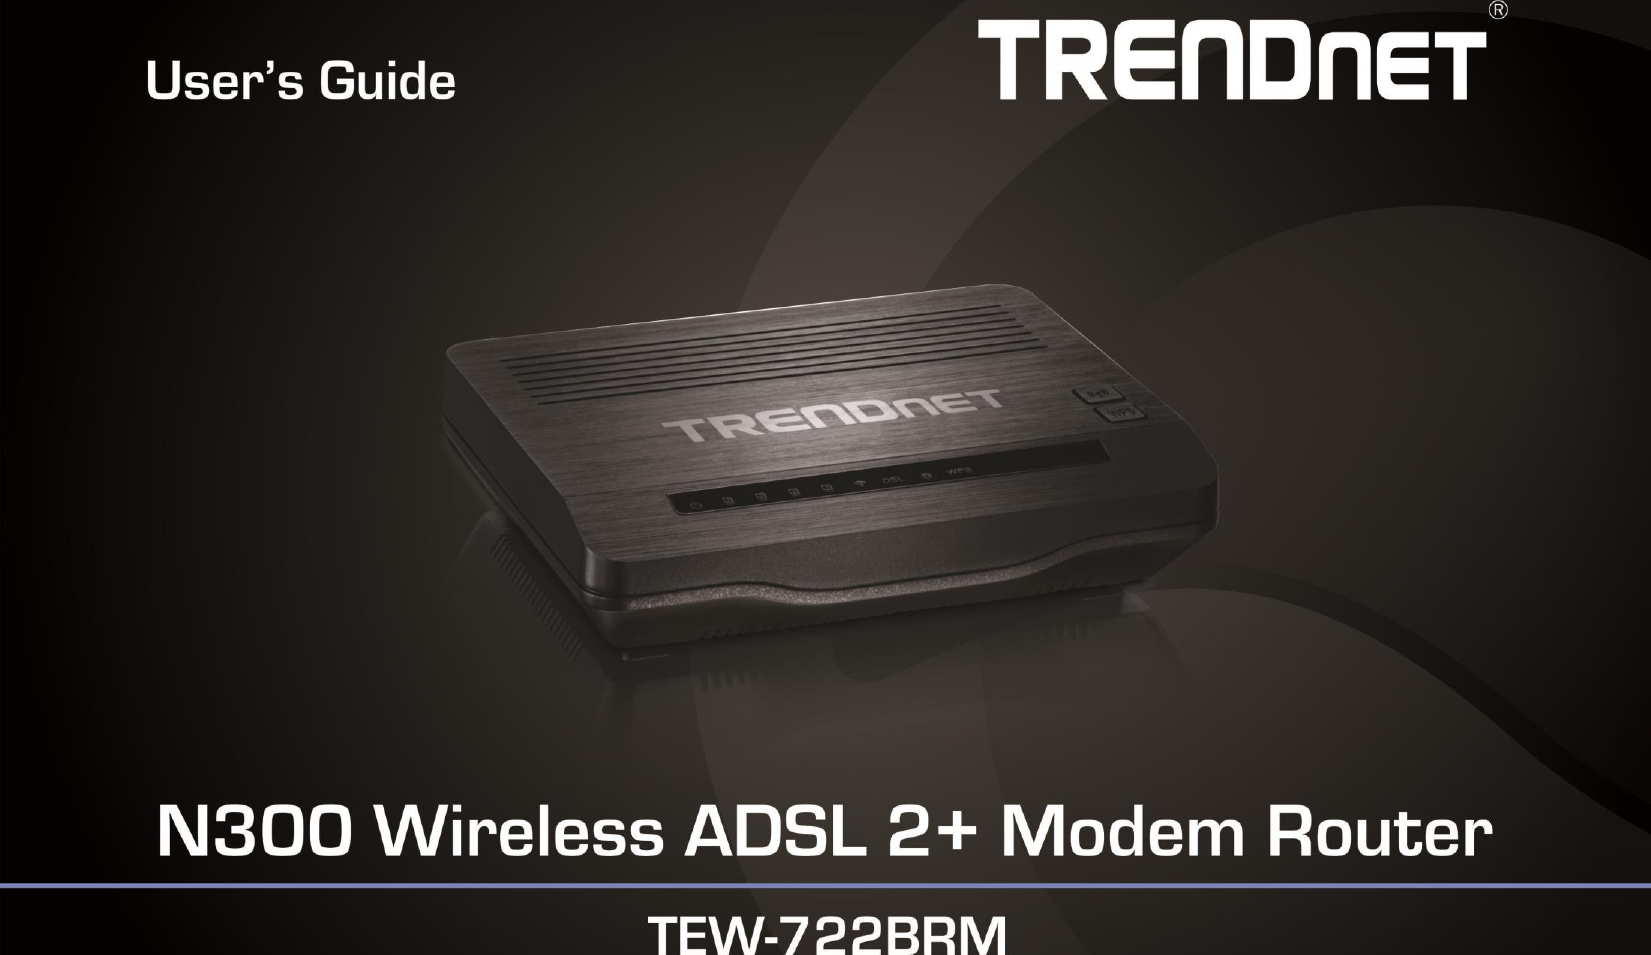             TRENDnet User’s Guide Cover Page 